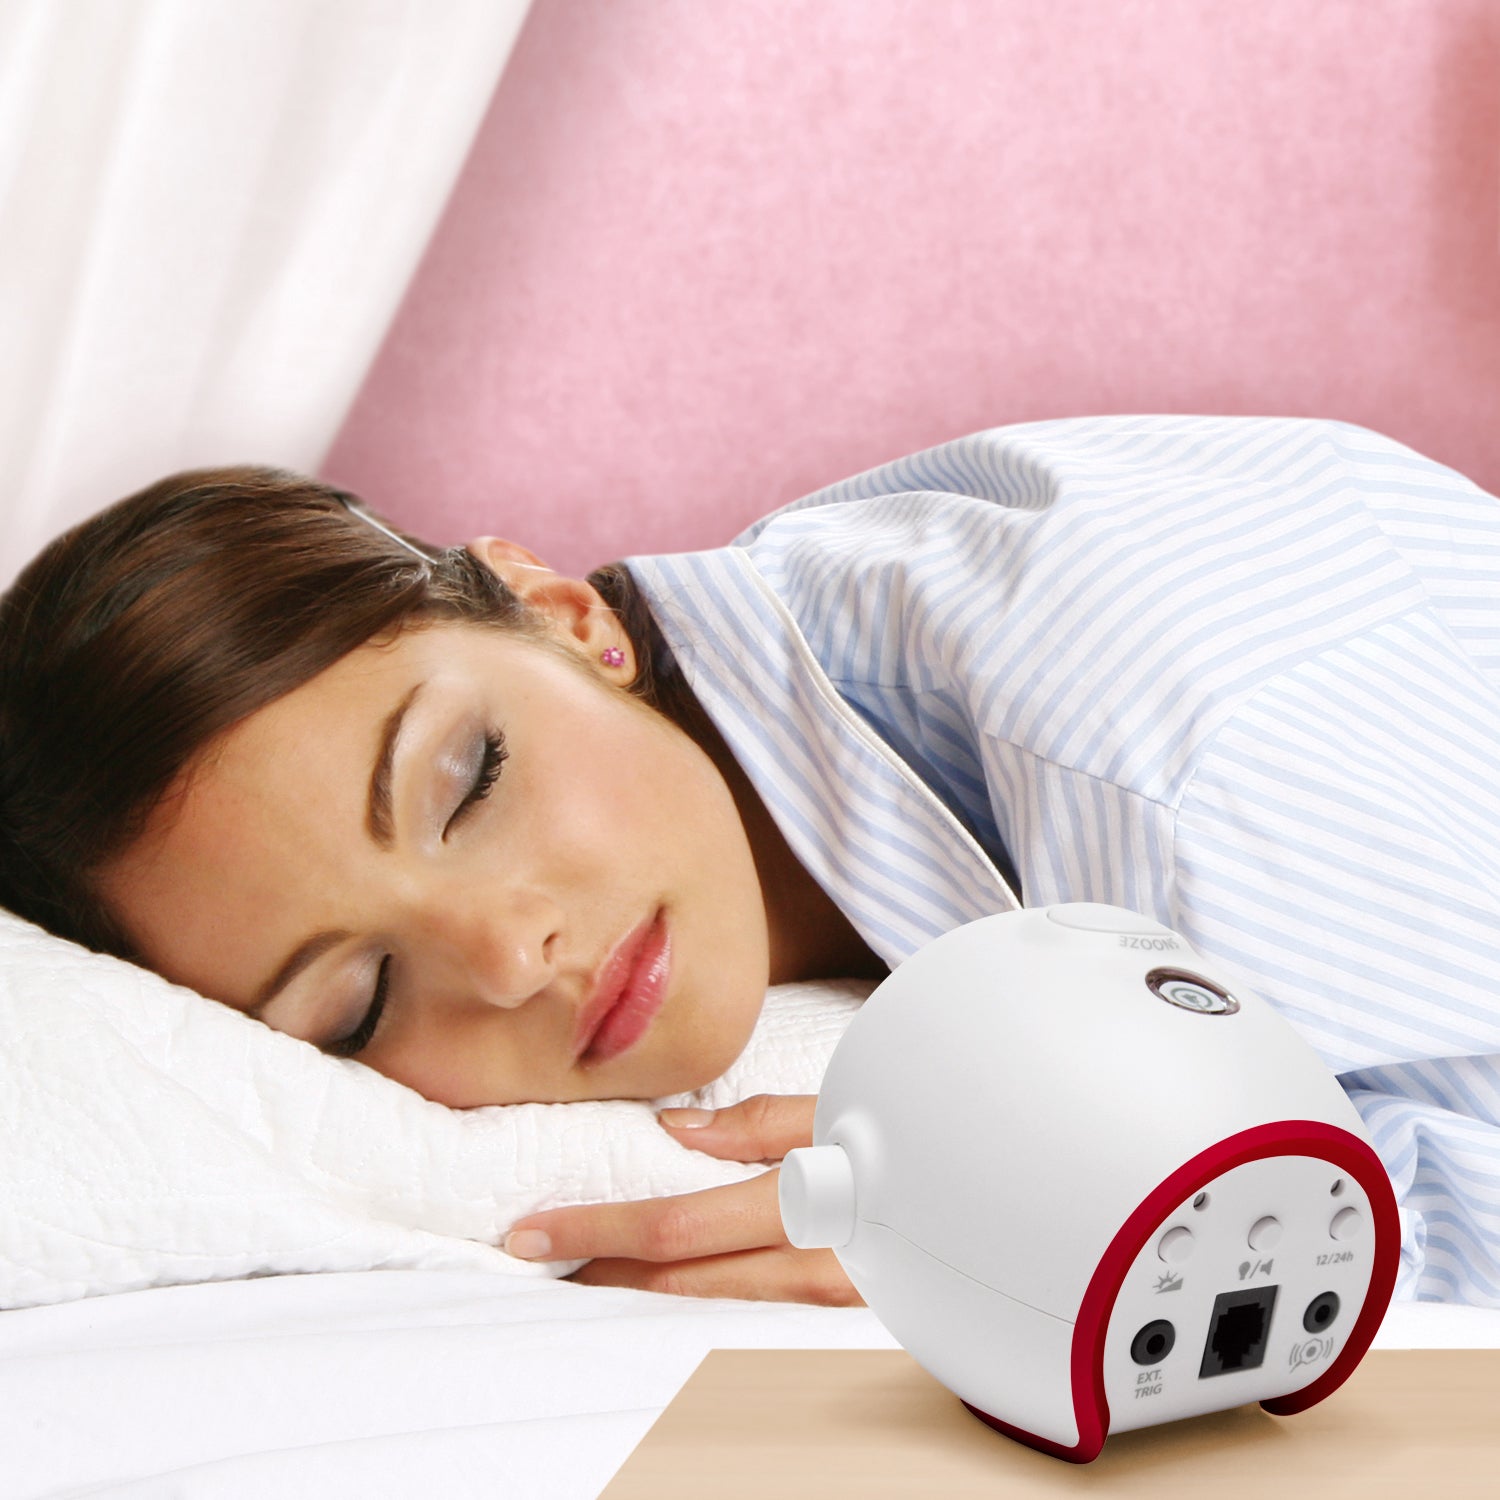 Entry Alert Notification System | with Magnetic Switch, Alarm Clock Receiver and Bed Shaker